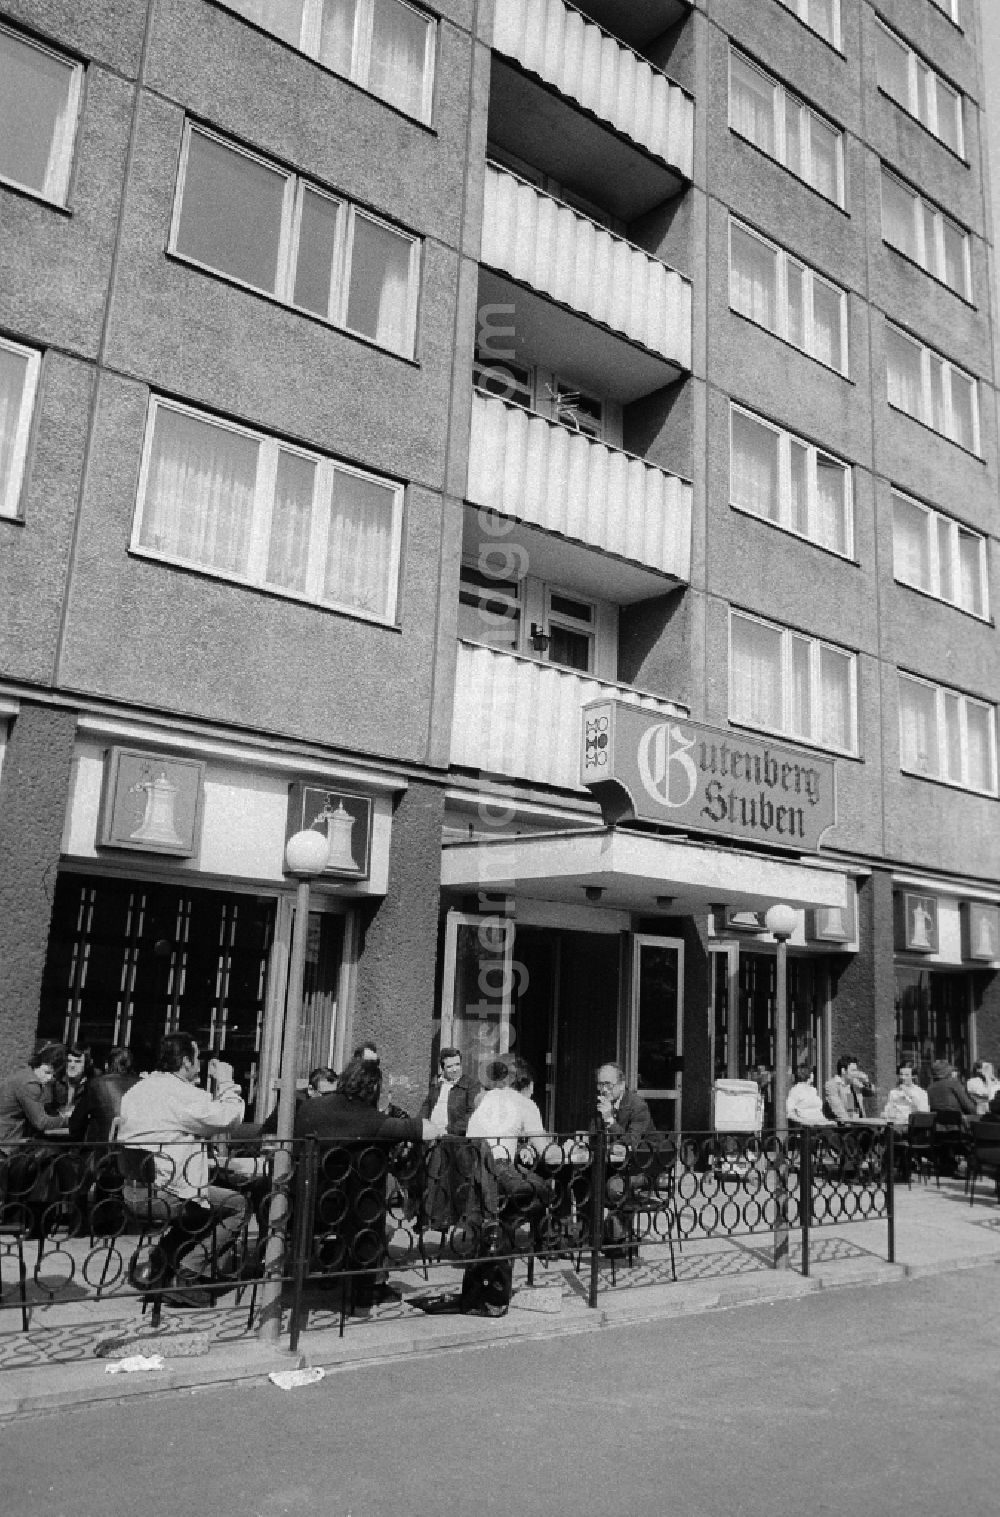 GDR image archive: Berlin - The restaurant Gutenberg rooms the HO (trading organisation) in the street of the Paris local authority district in Berlin, the former capital of the GDR, German democratic republic